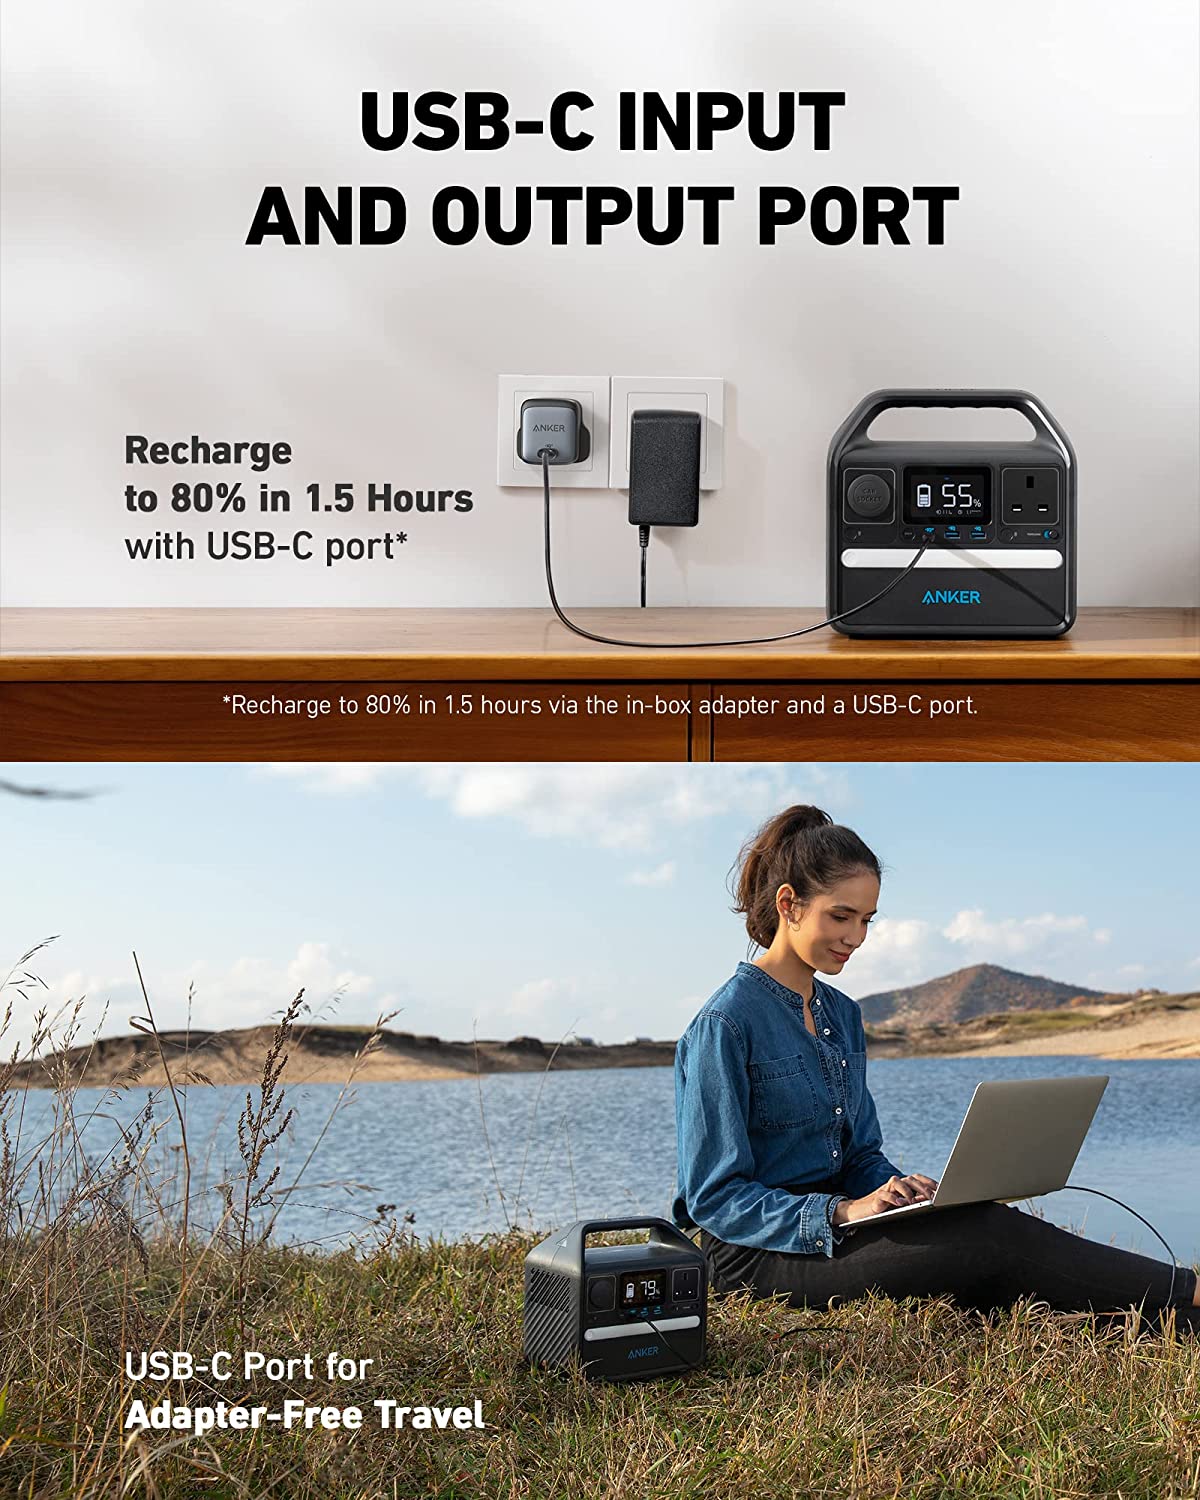 ANKER 521 Portable Power Station 256Wh